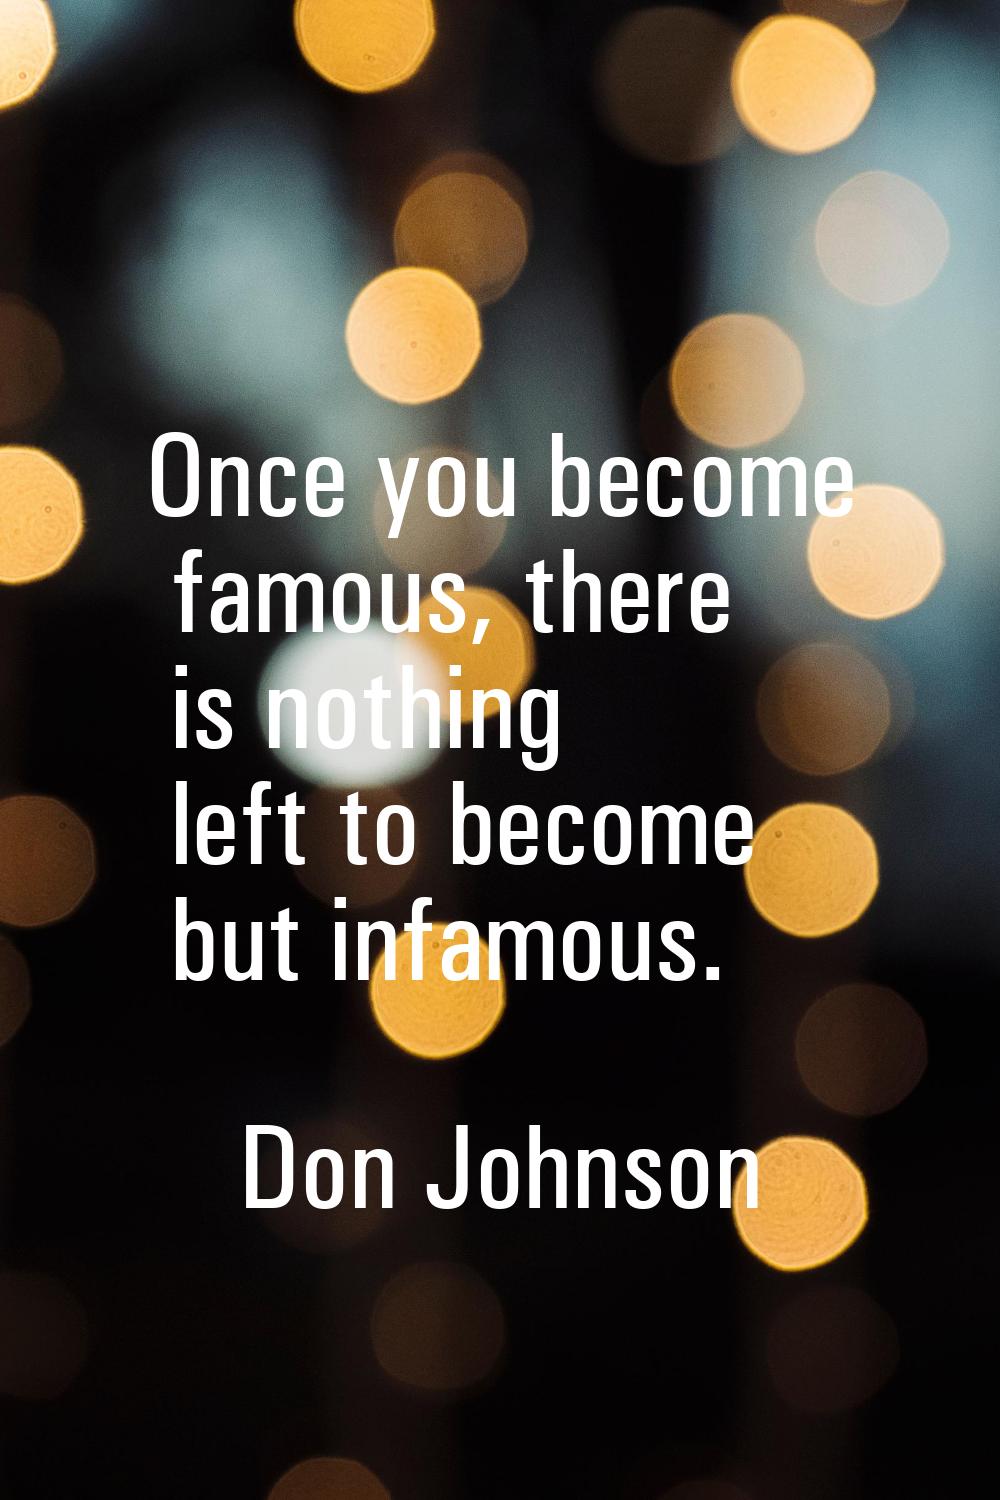 Once you become famous, there is nothing left to become but infamous.